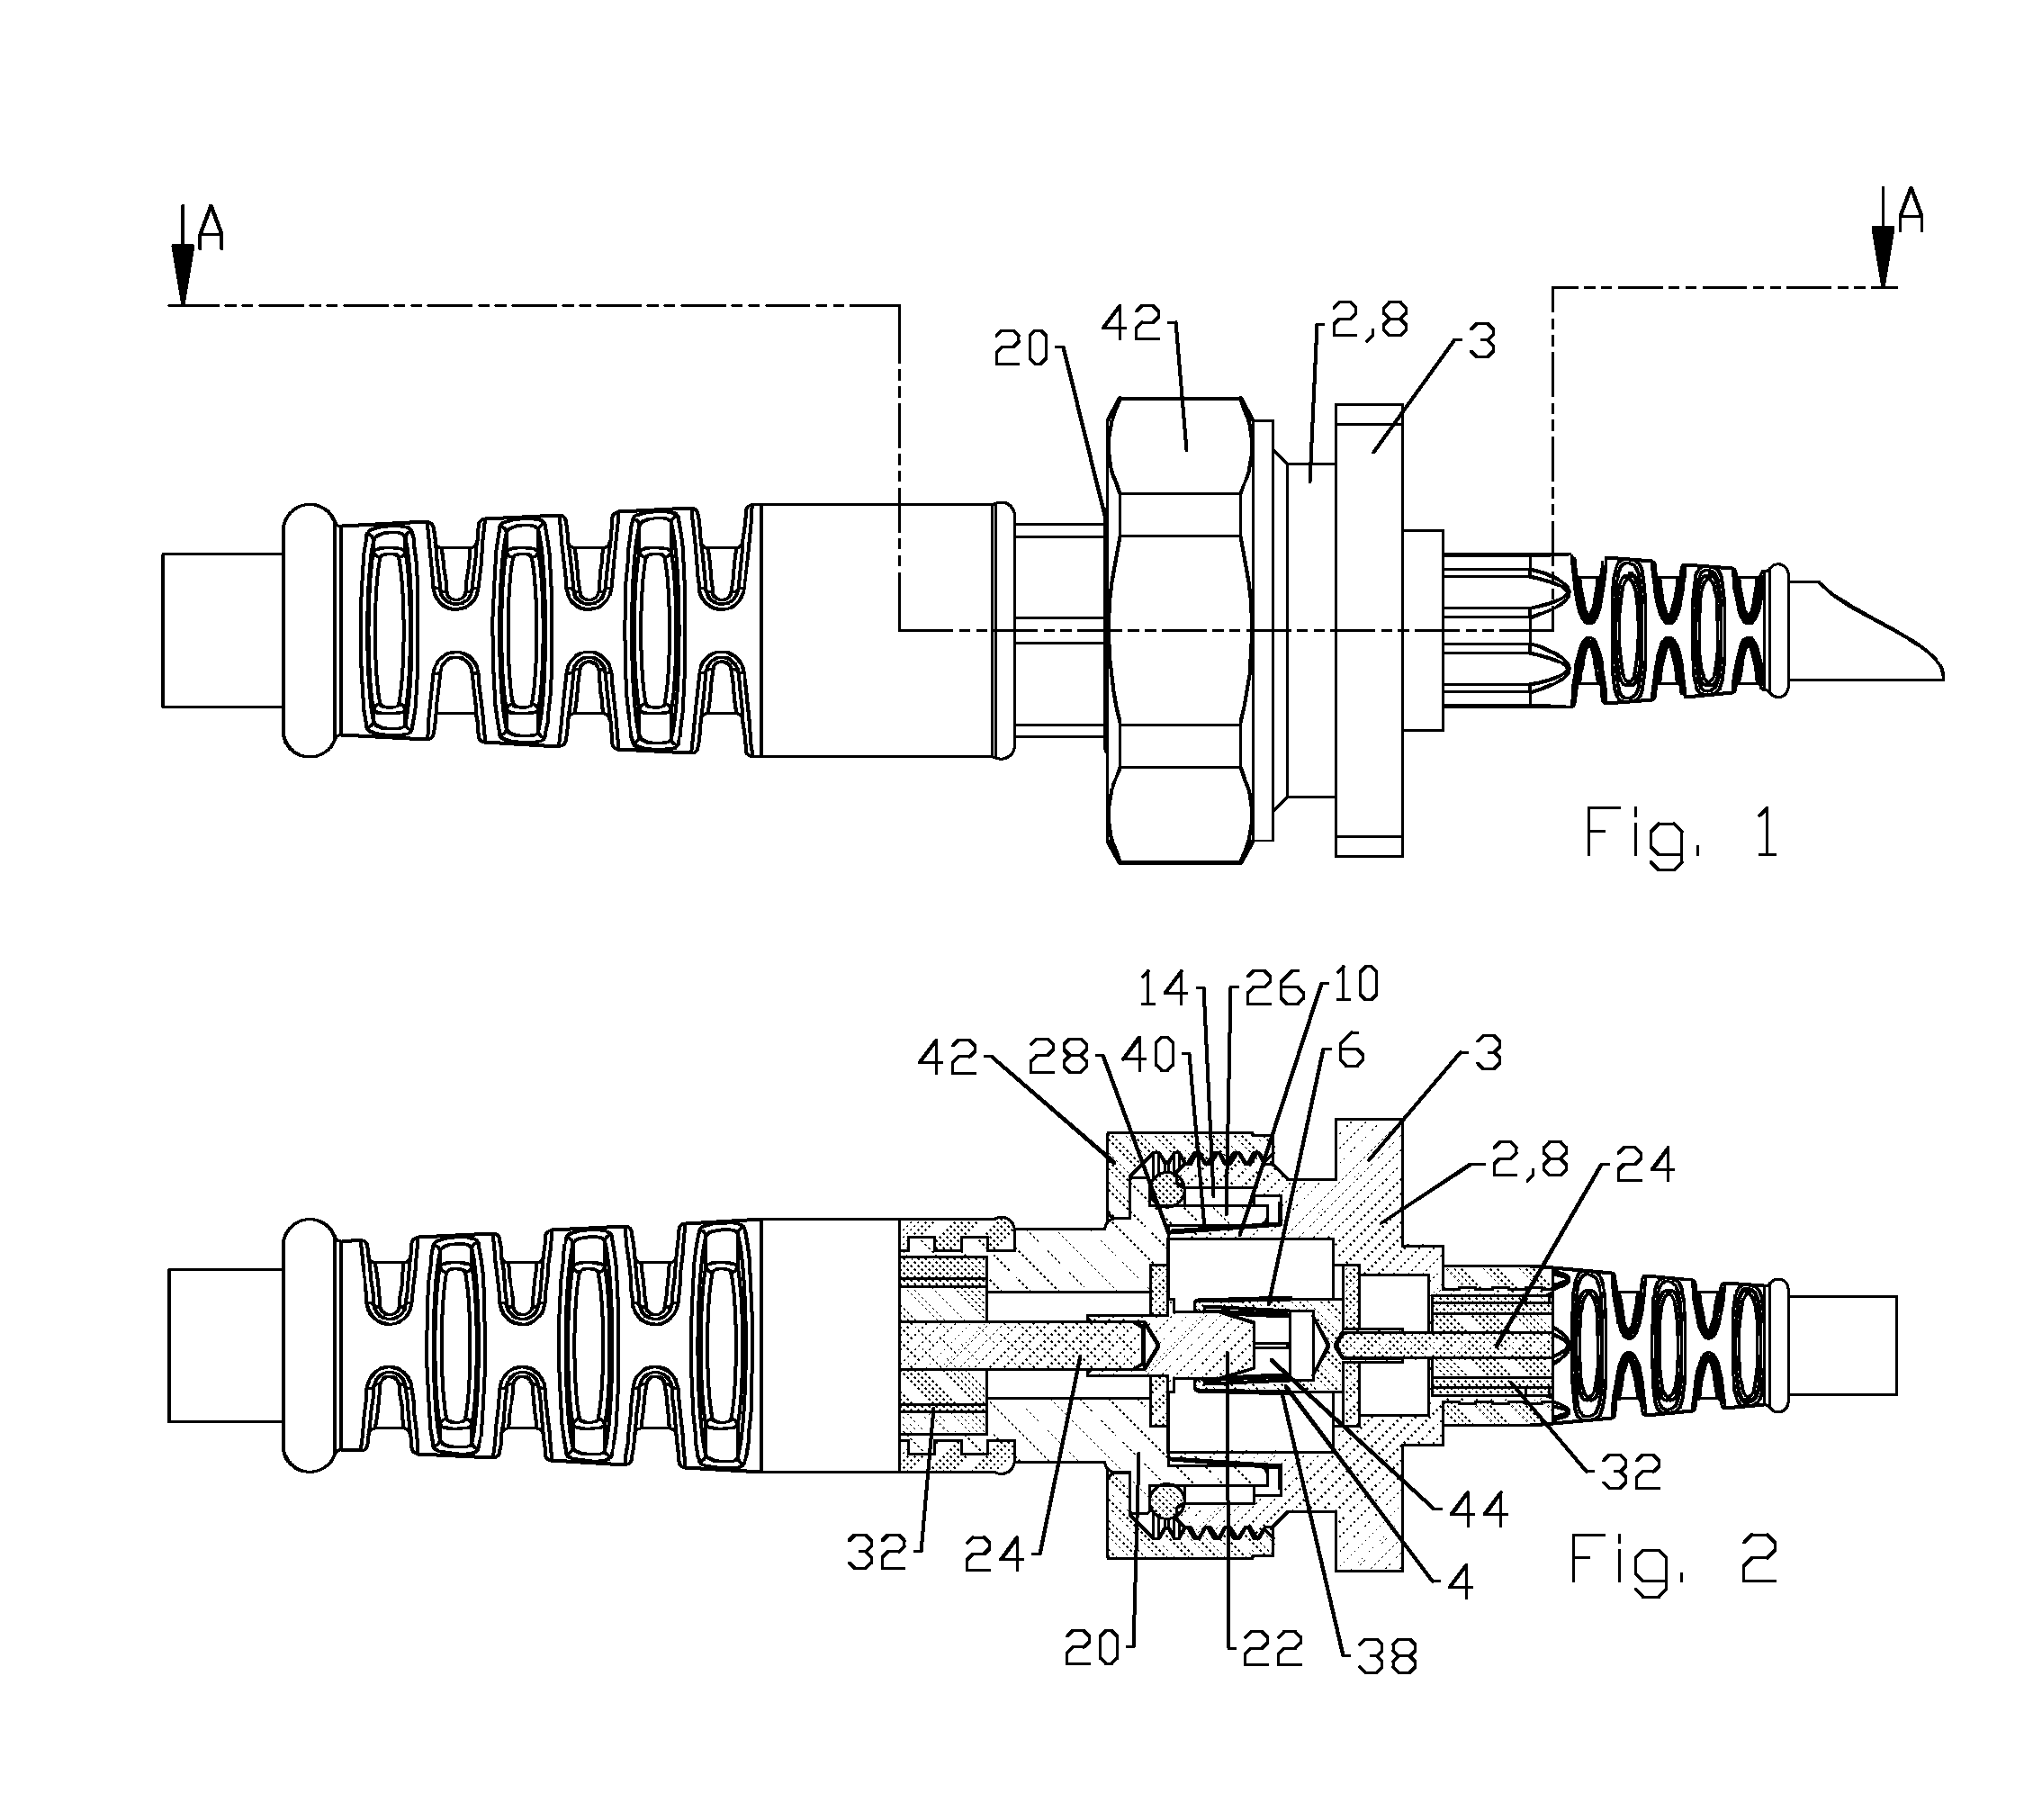 Dual connector interface for capacitive or conductive coupling